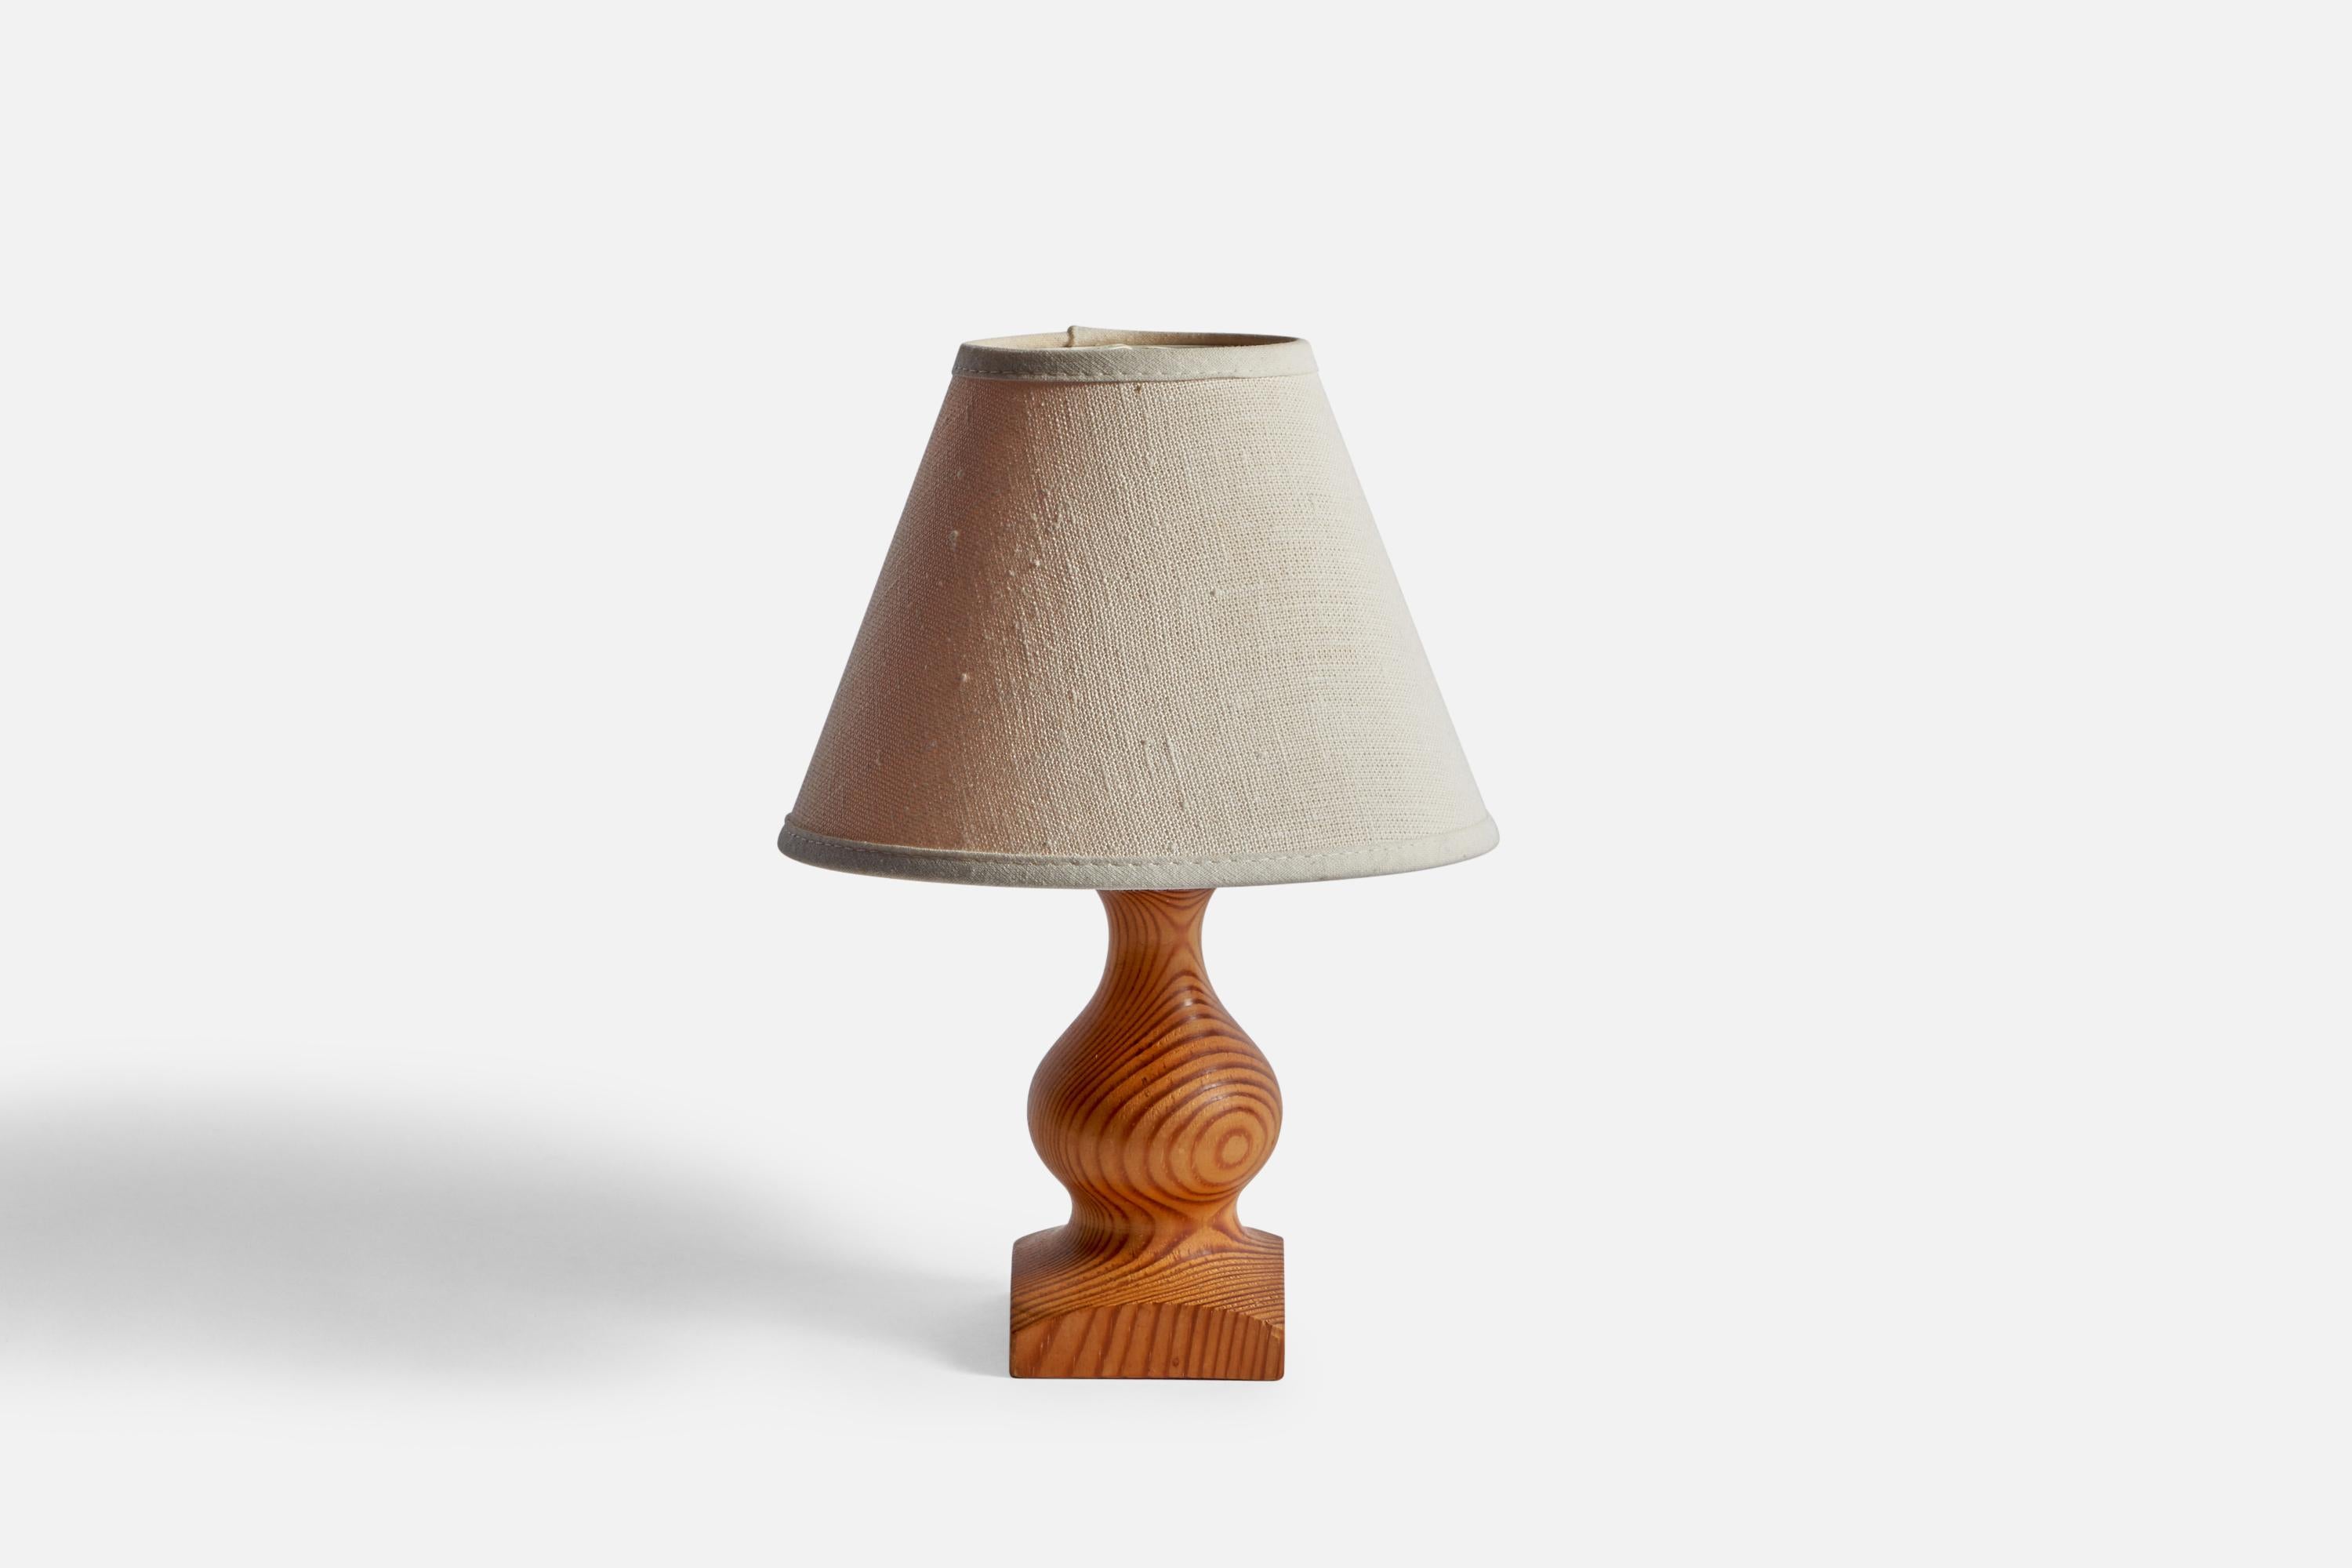 A pine and off-white fabric table lamp designed and produced in Sweden, 1970s.

Overall Dimensions (inches): 9.5” H x 6.75” Diameter
Stated dimensions include shade.
Bulb Specifications: E-14 Bulb
Number of Sockets: 1
All lighting will be converted